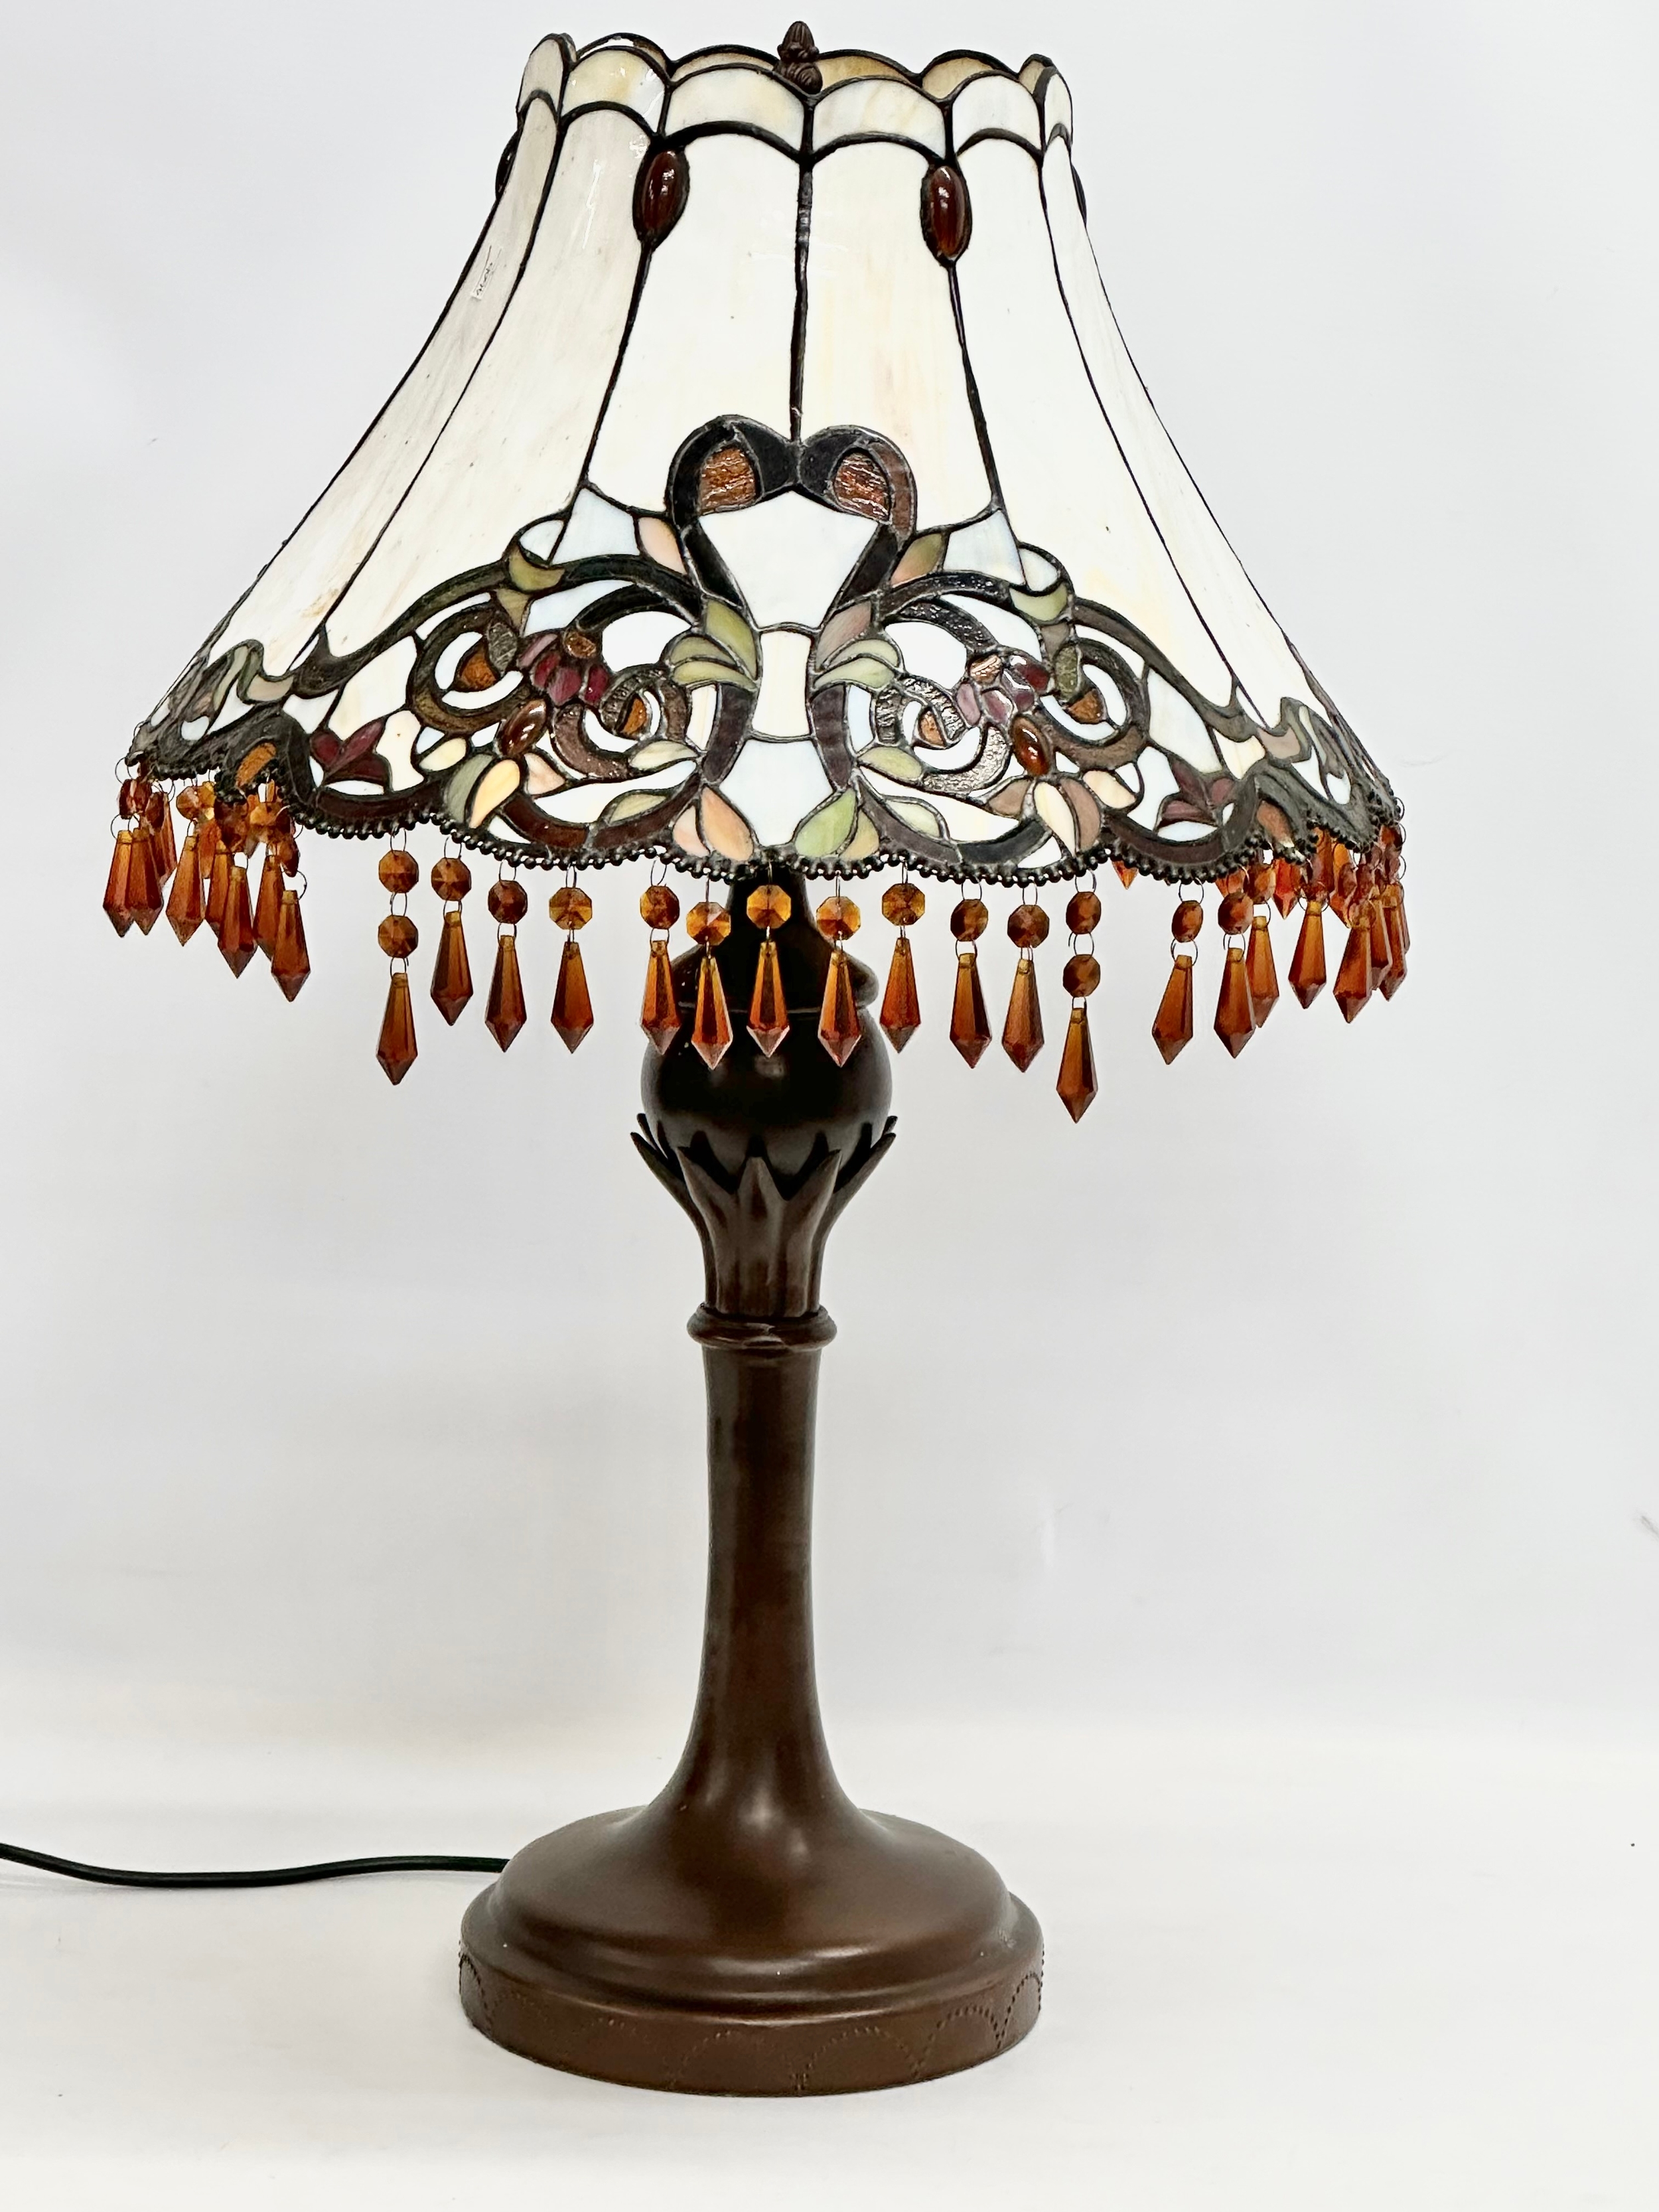 A large Tiffany style table lamp with amber glass droplets. 44x70cm